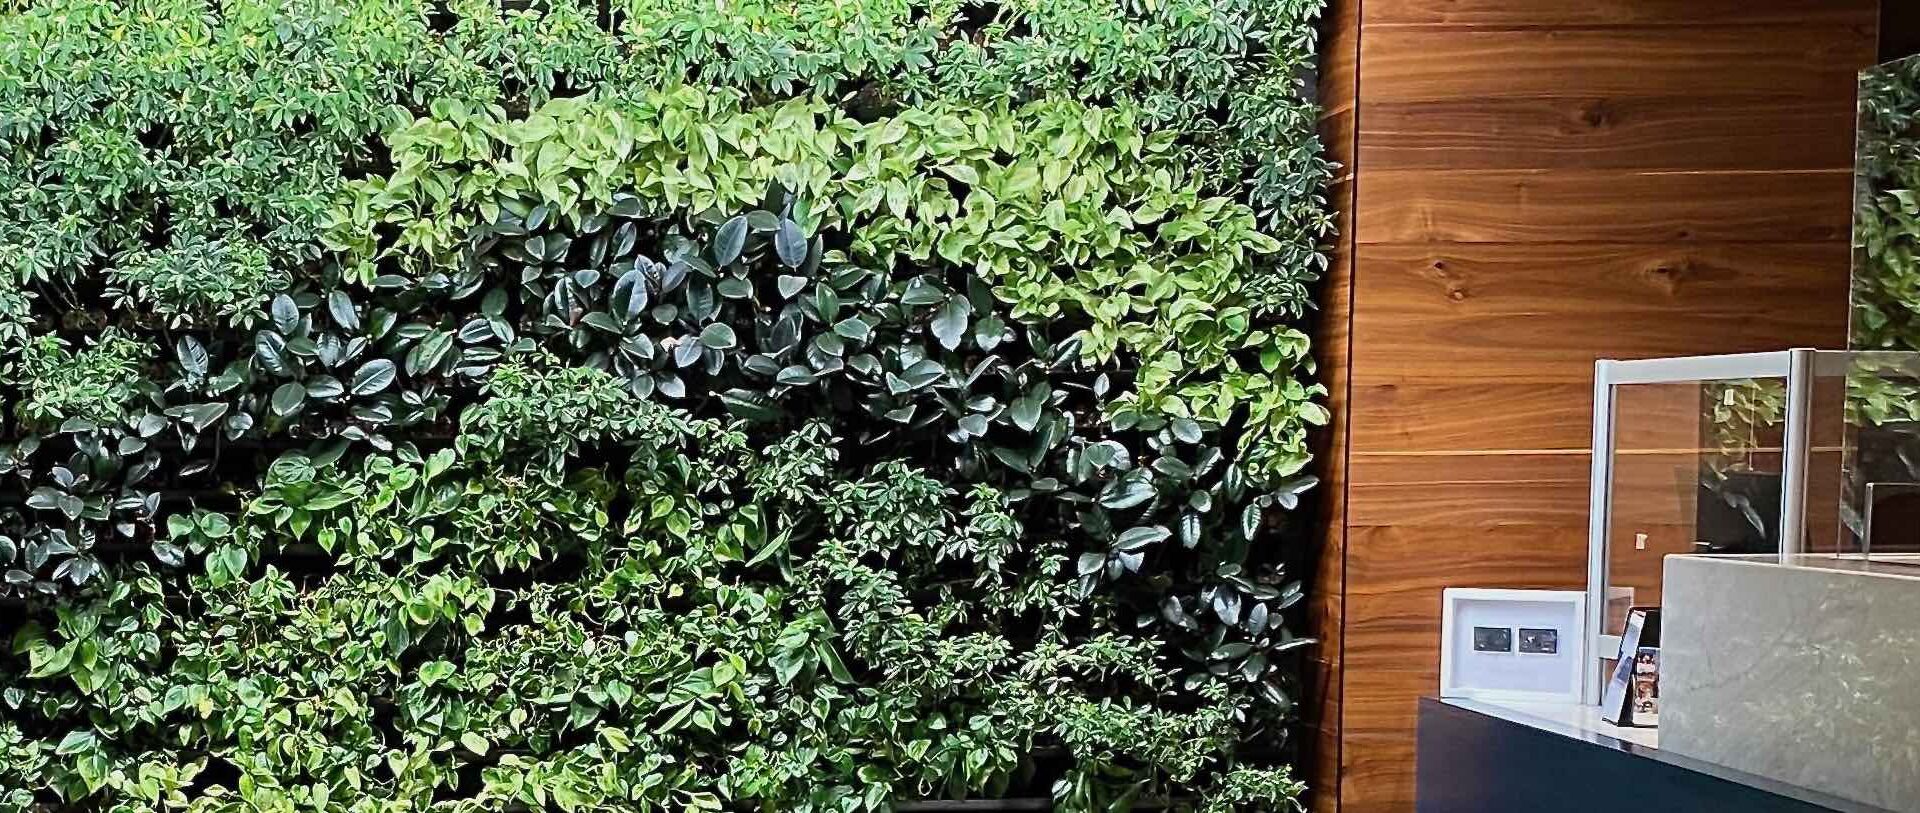 a wall of green plants